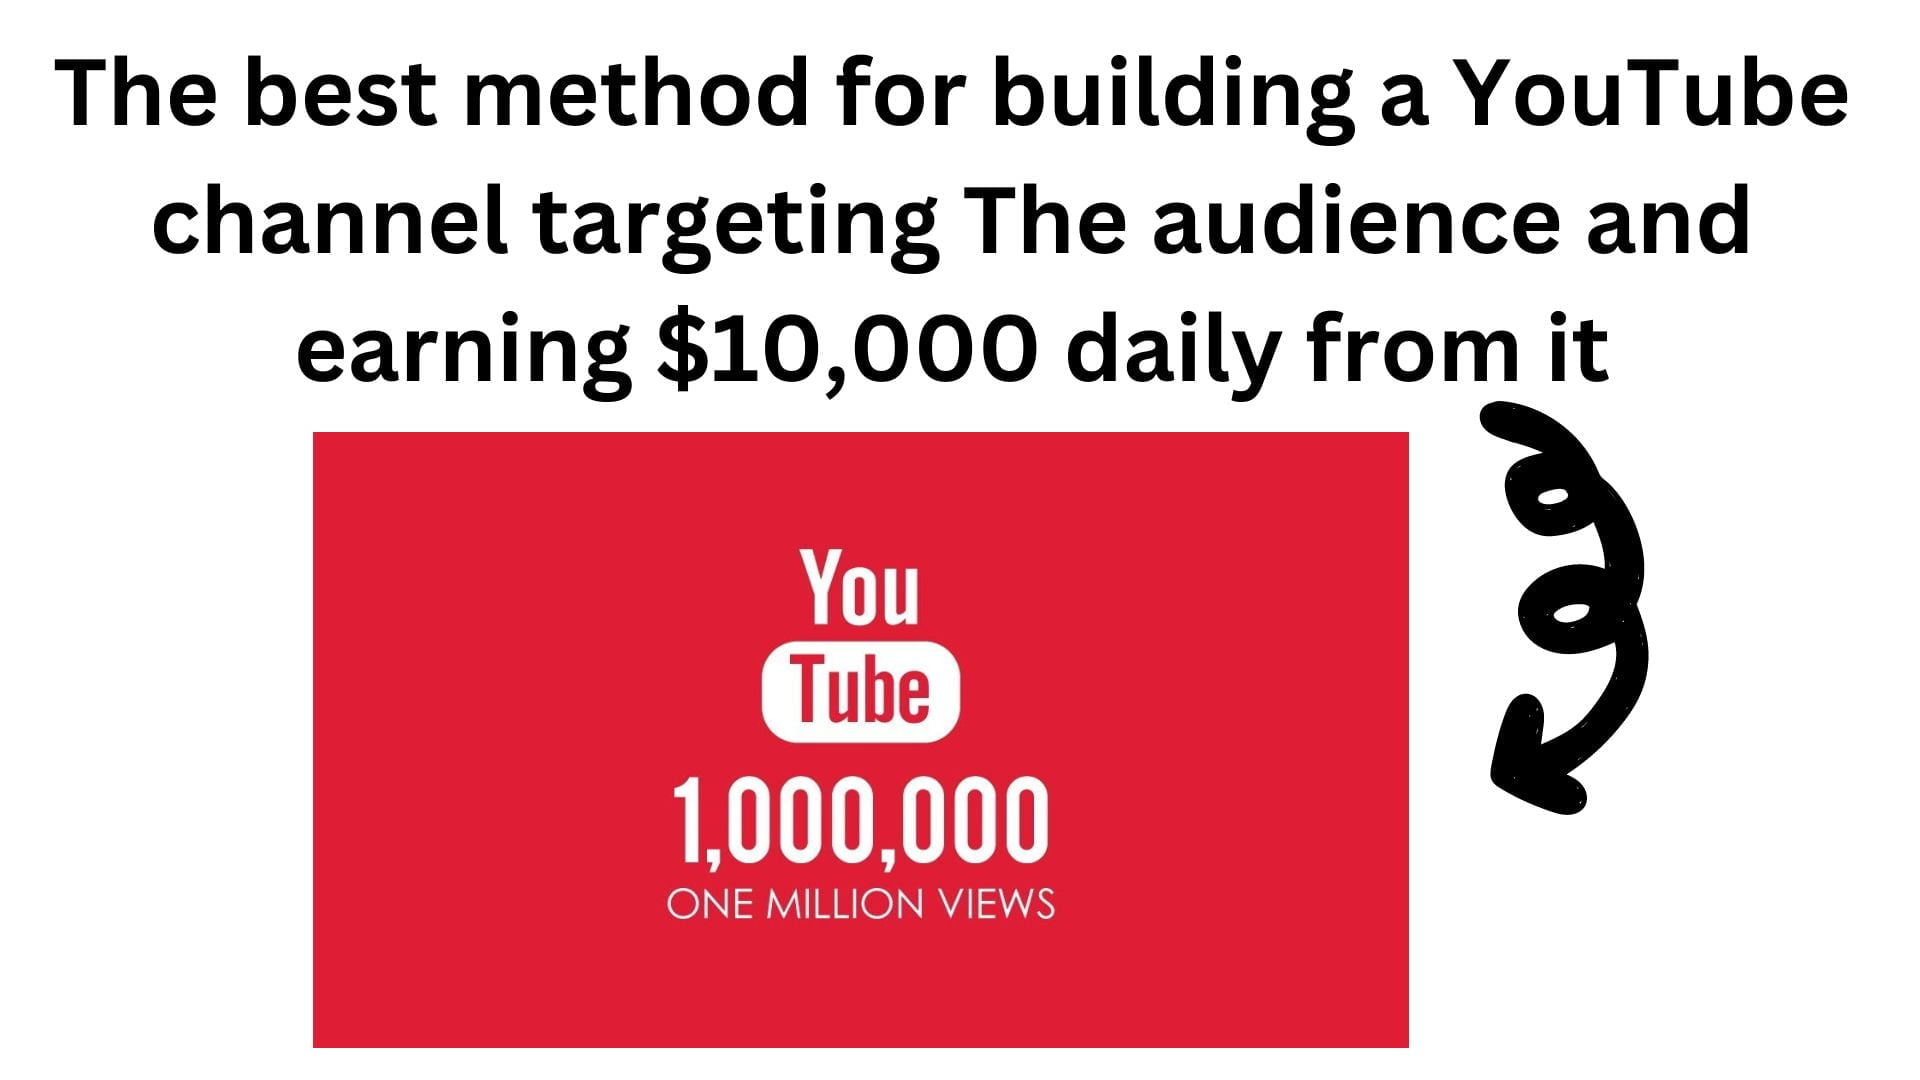 The Best Method For Building A Youtube Channel Targeting The Audience And Earning $10,000 Daily From It